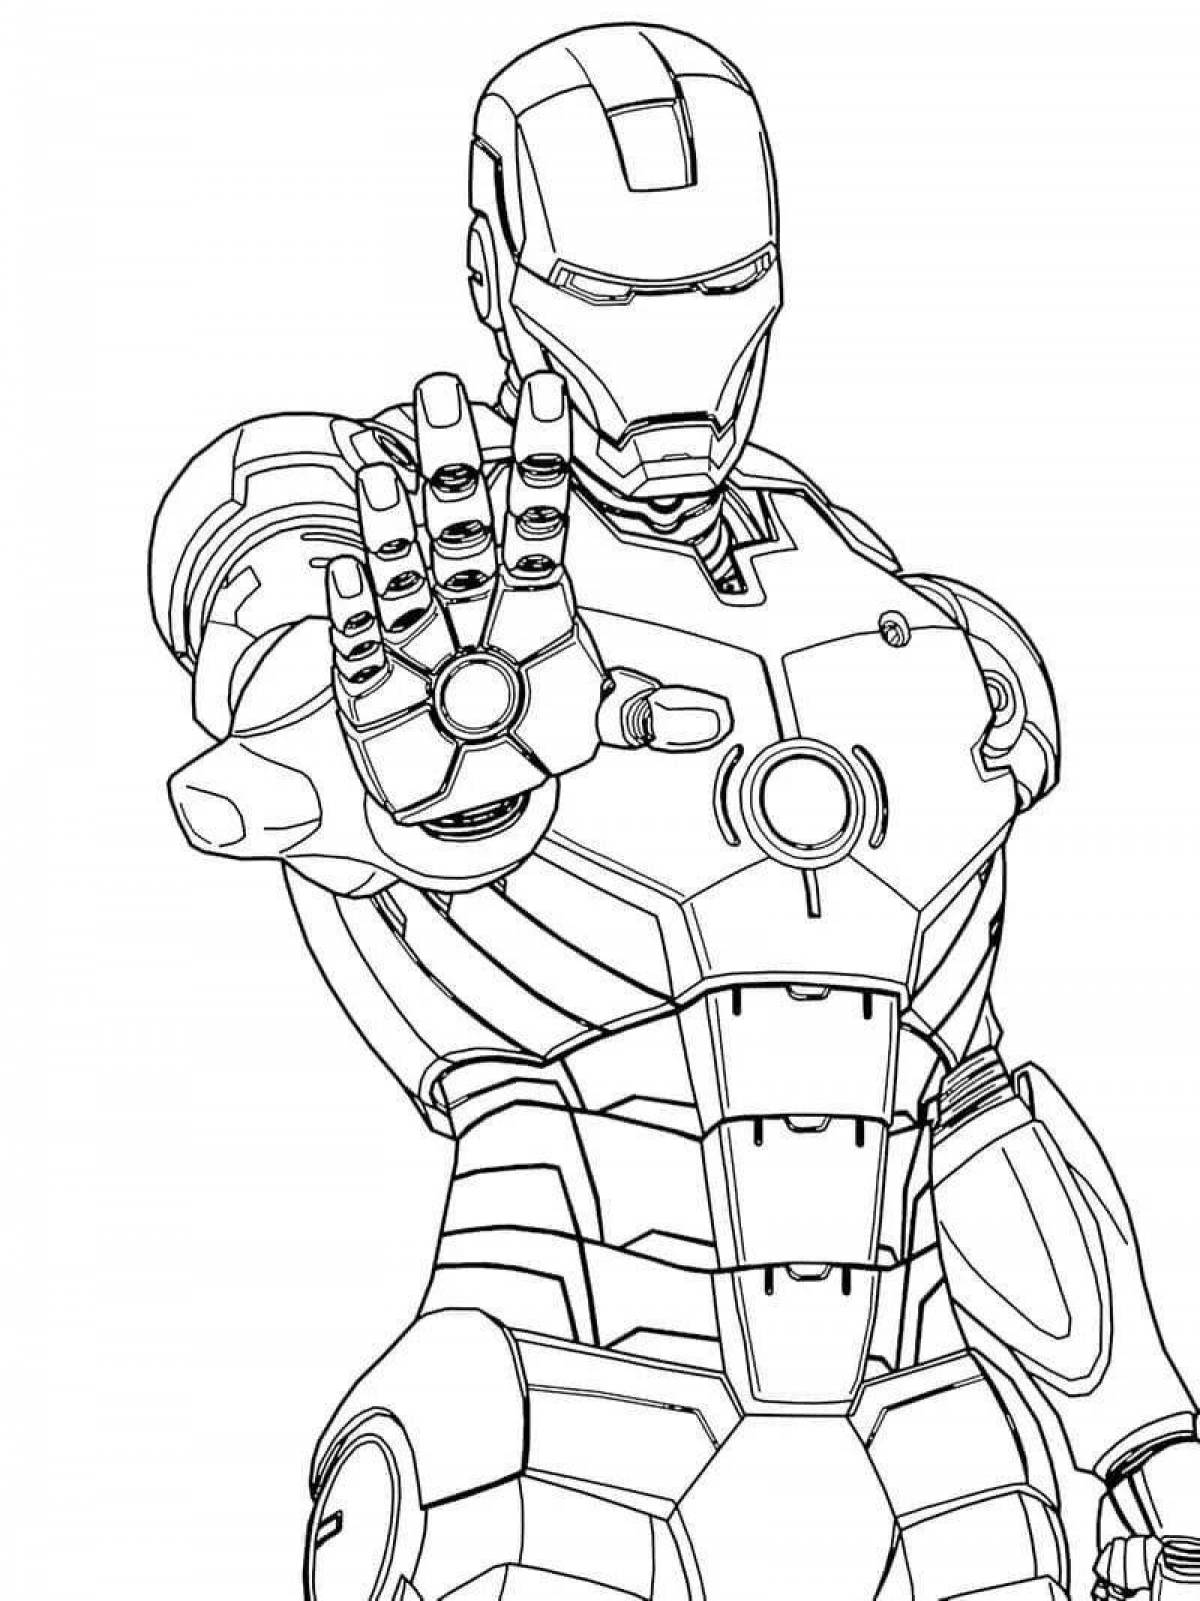 Iron man fat coloring for boys